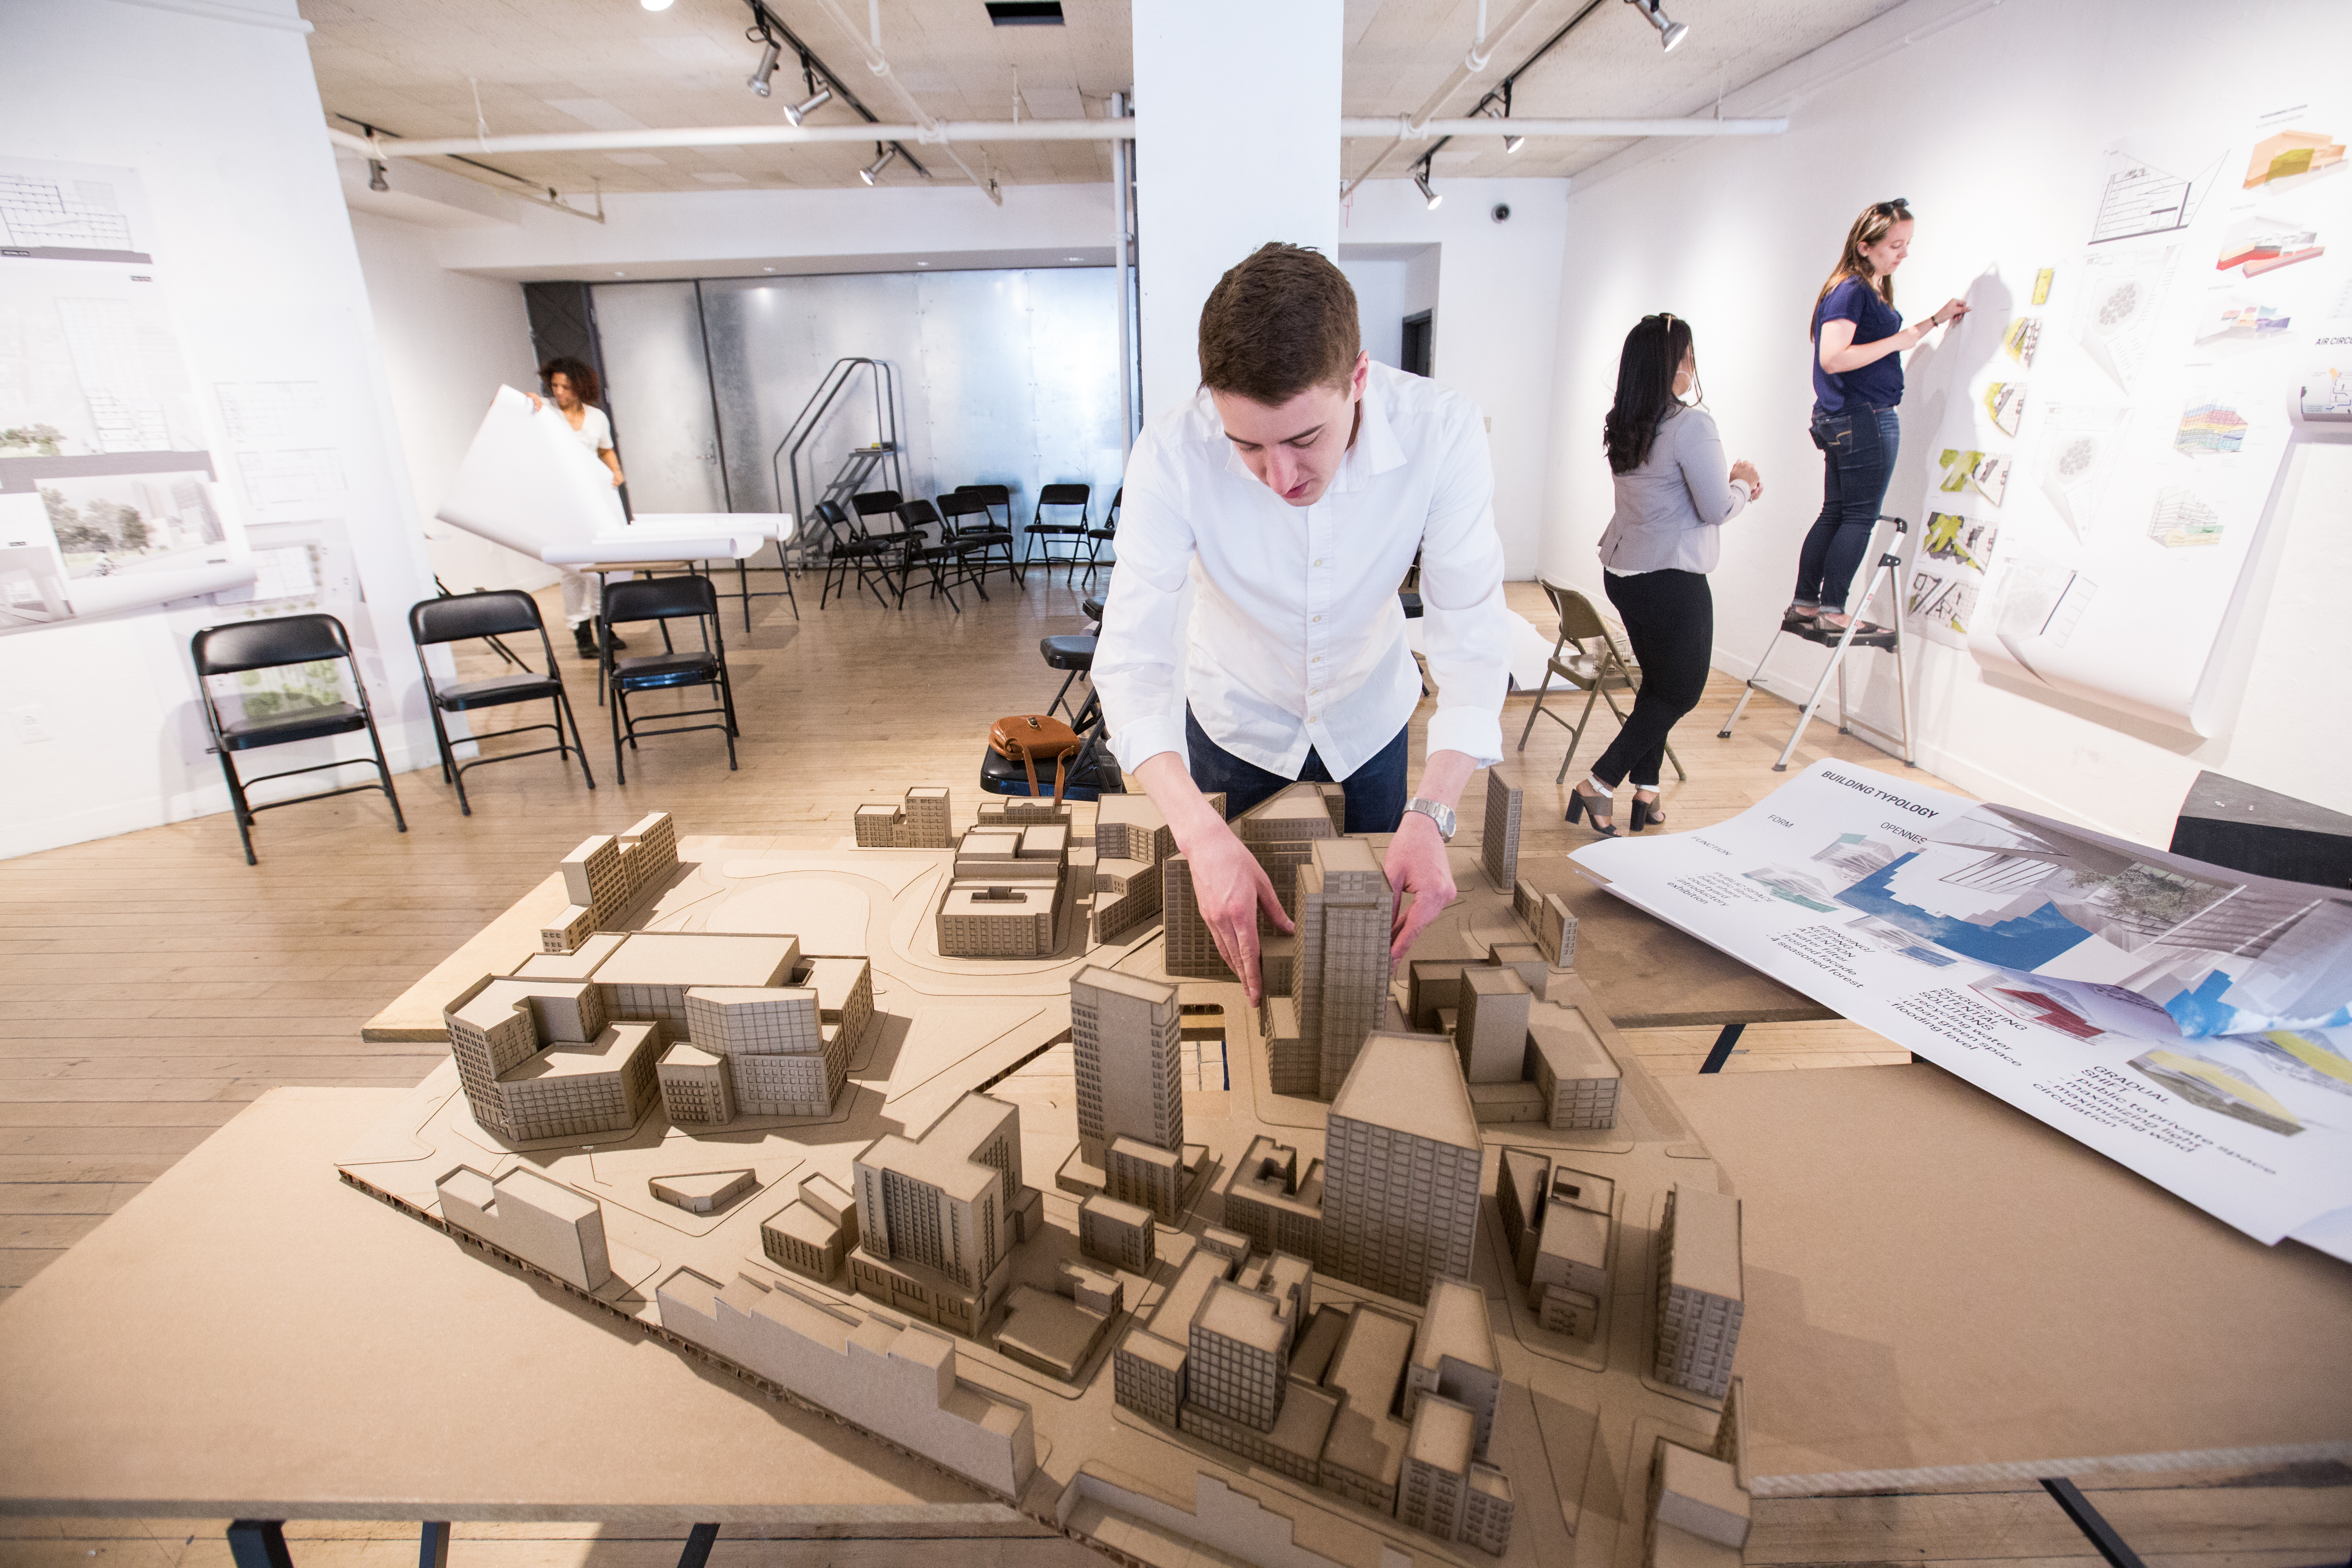 A RISD architecture student working on a cardboard model of an urban scene in a white-walled classroom.